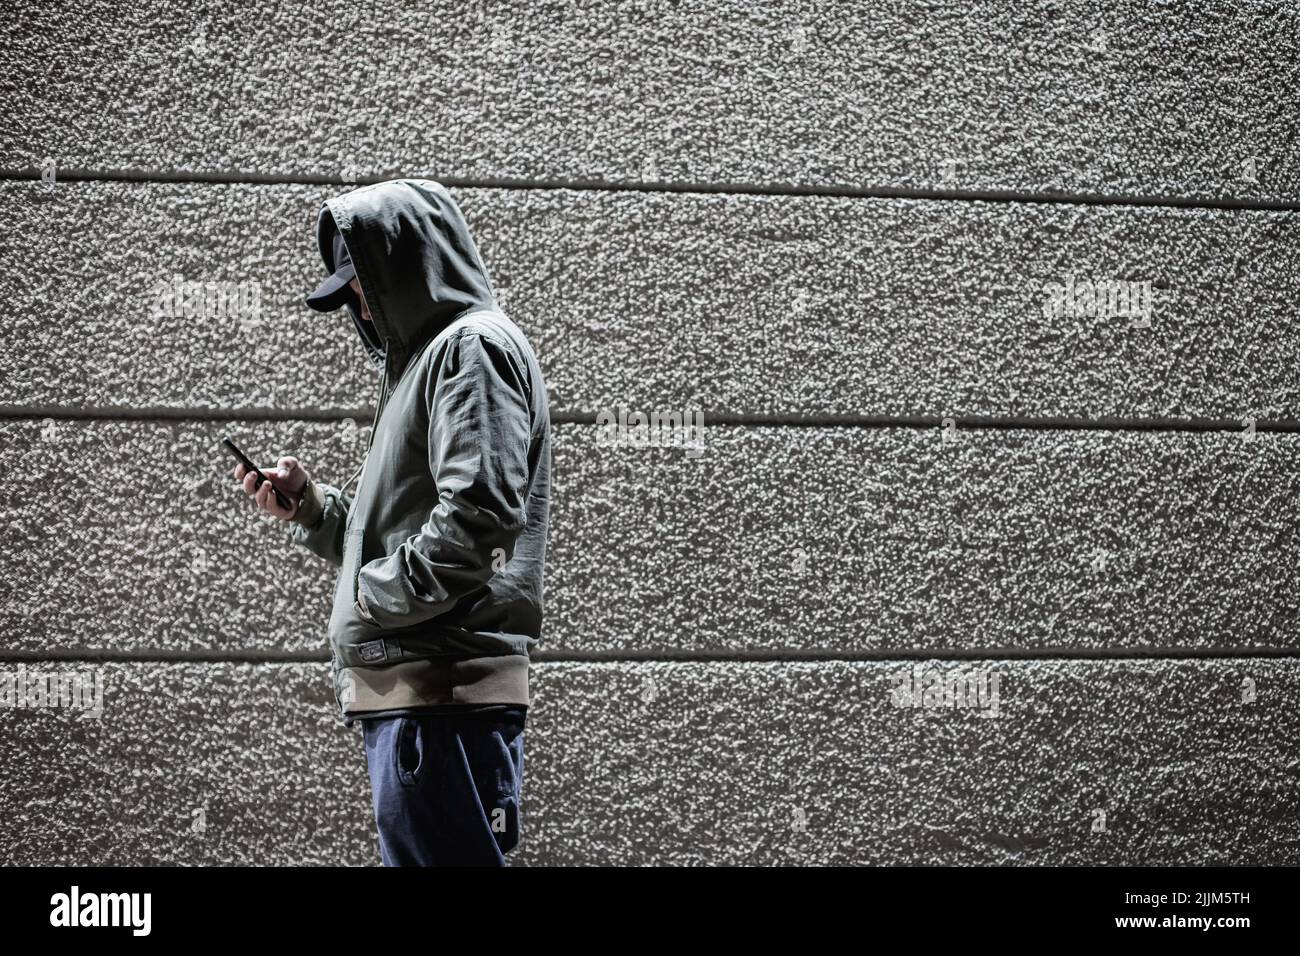 A side view of a person in an anorak holding his phone against a striped wall background Stock Photo